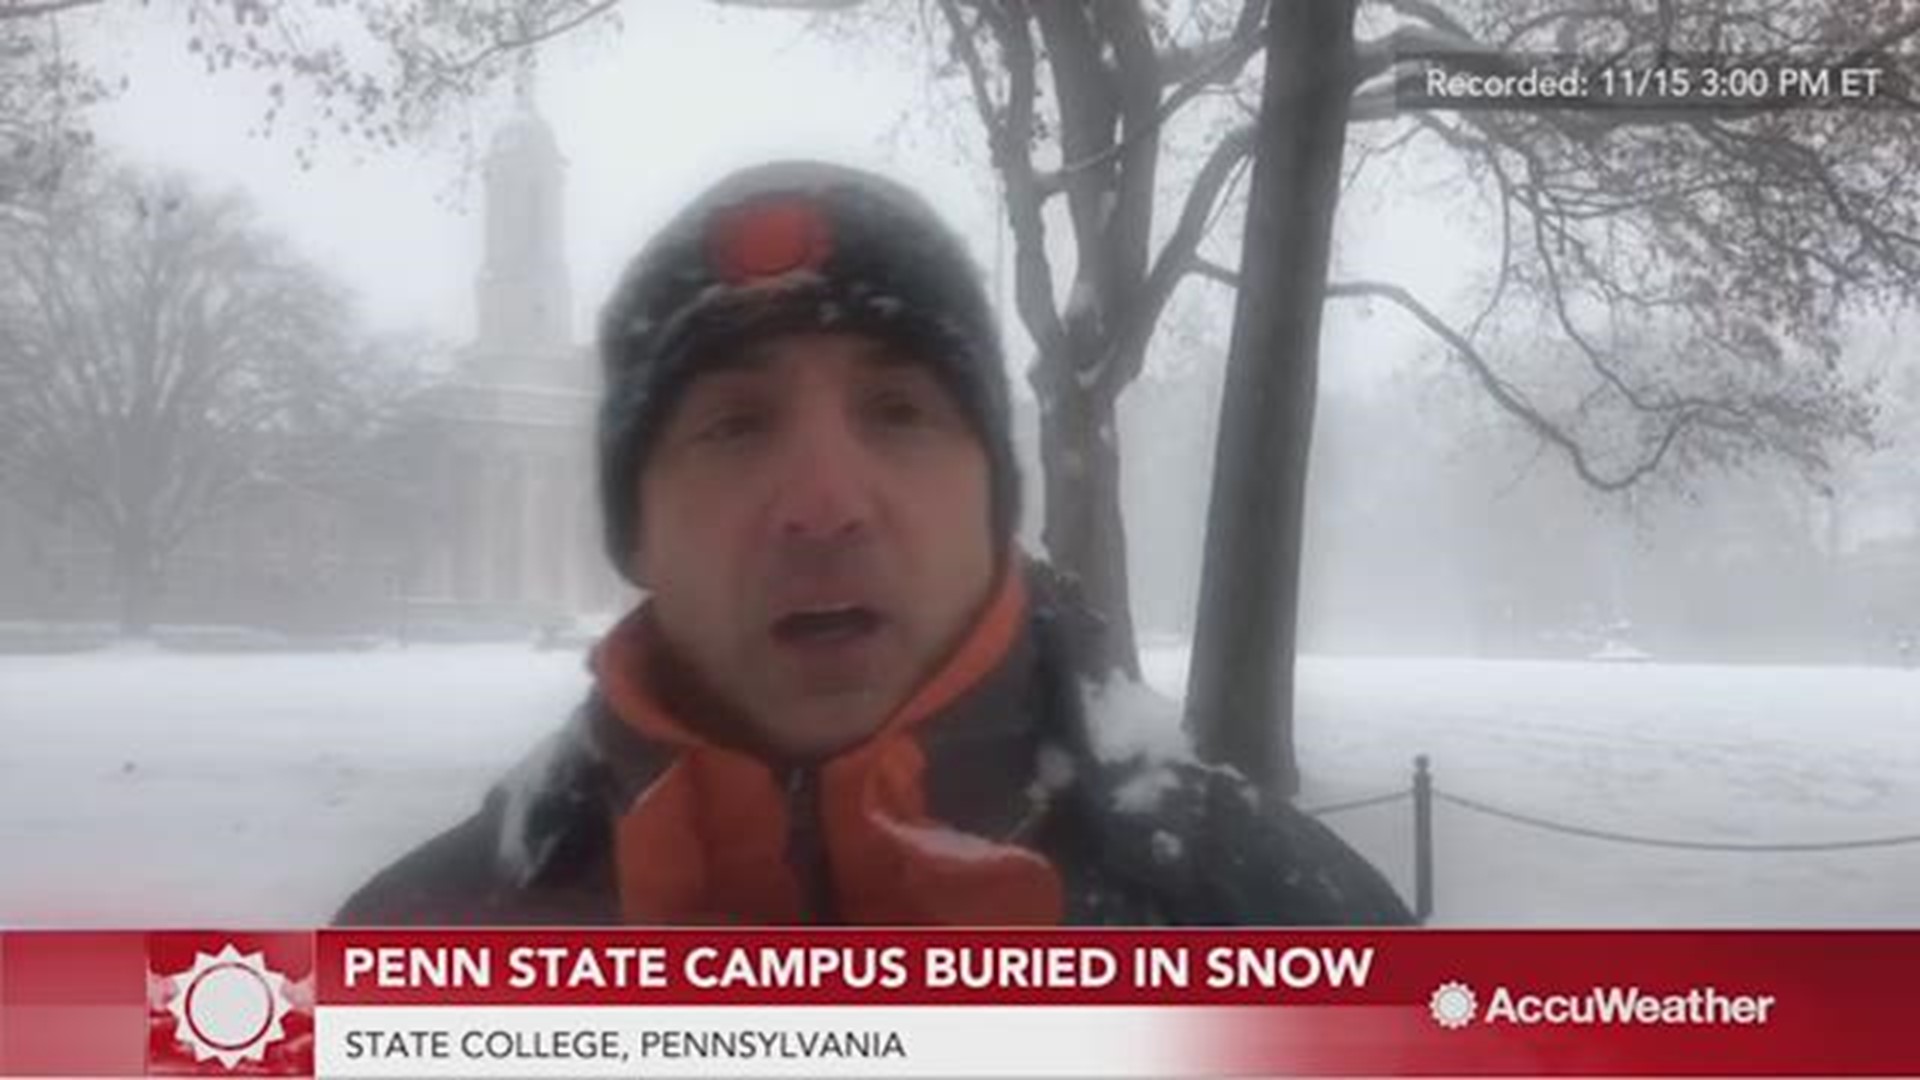 AccuWeather chief meteorologist Bernie Rayno is in State College, PA where heavy snowfall has buried roads and streets in midst of winter storm.